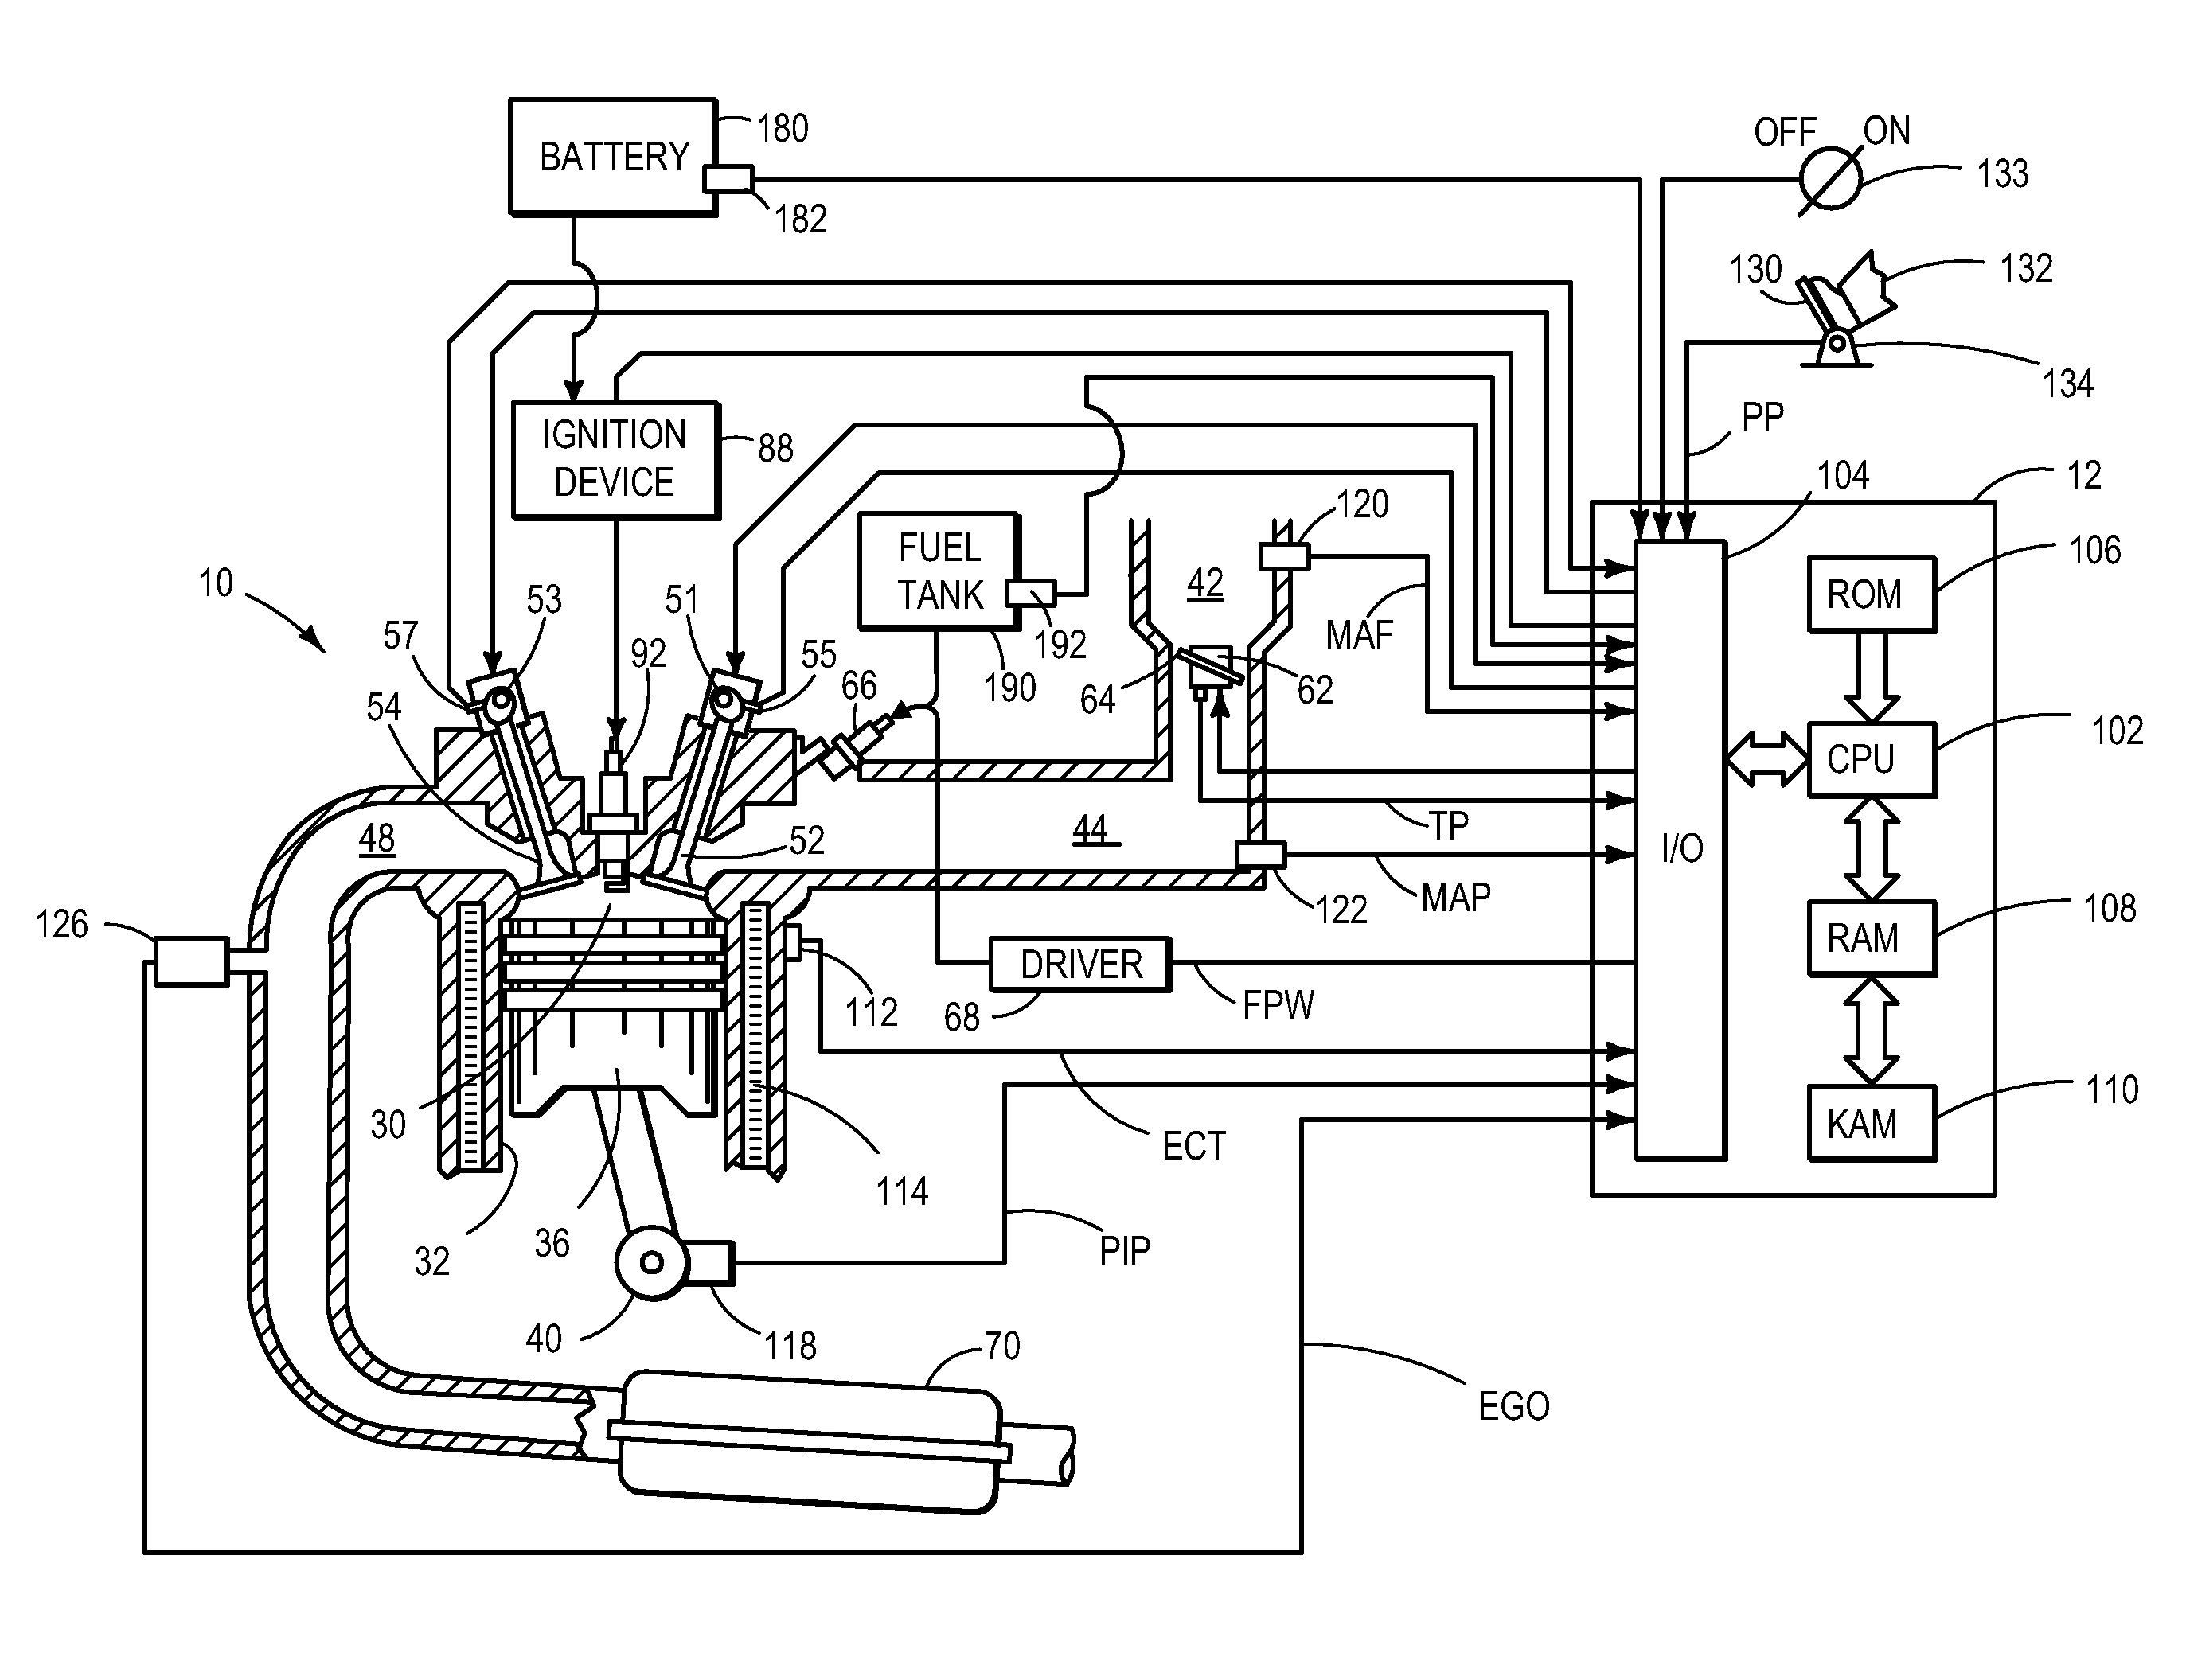 Ignition Energy Control for Mixed Fuel Engine